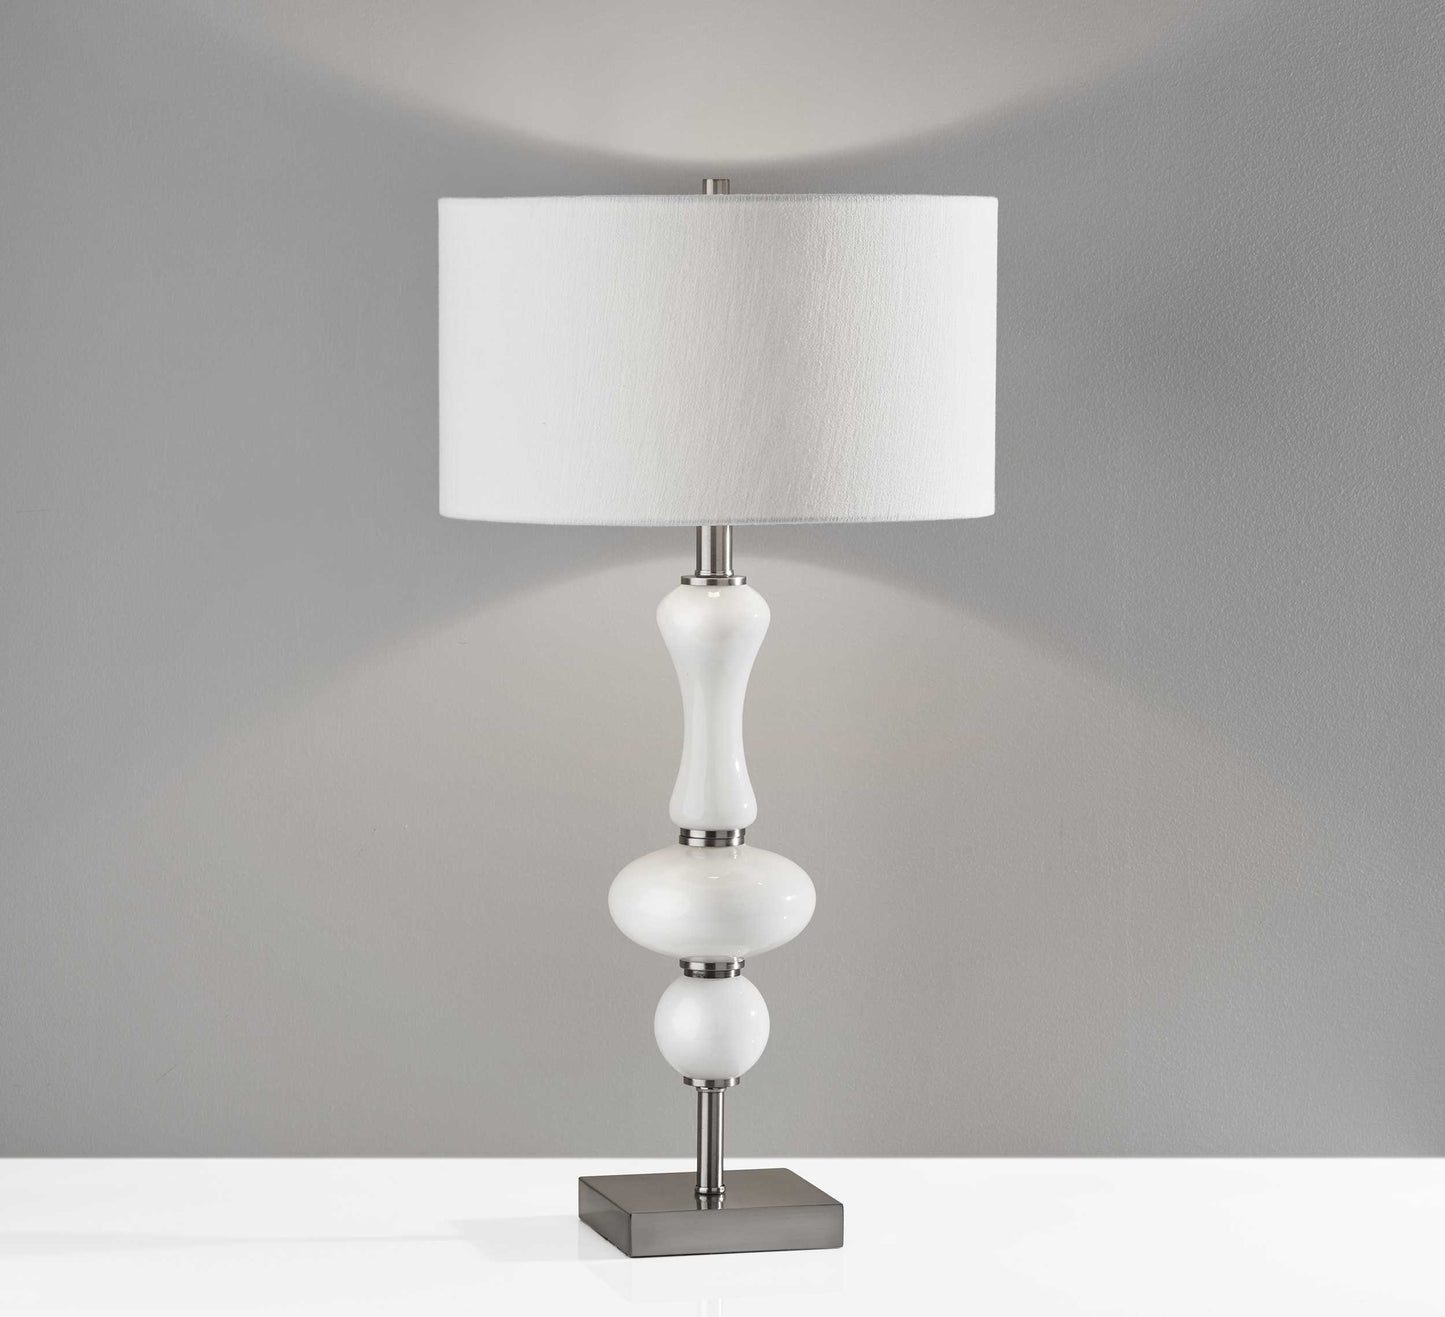 15" X 15" X 28.75" Brushed steel Glass Table Lamp